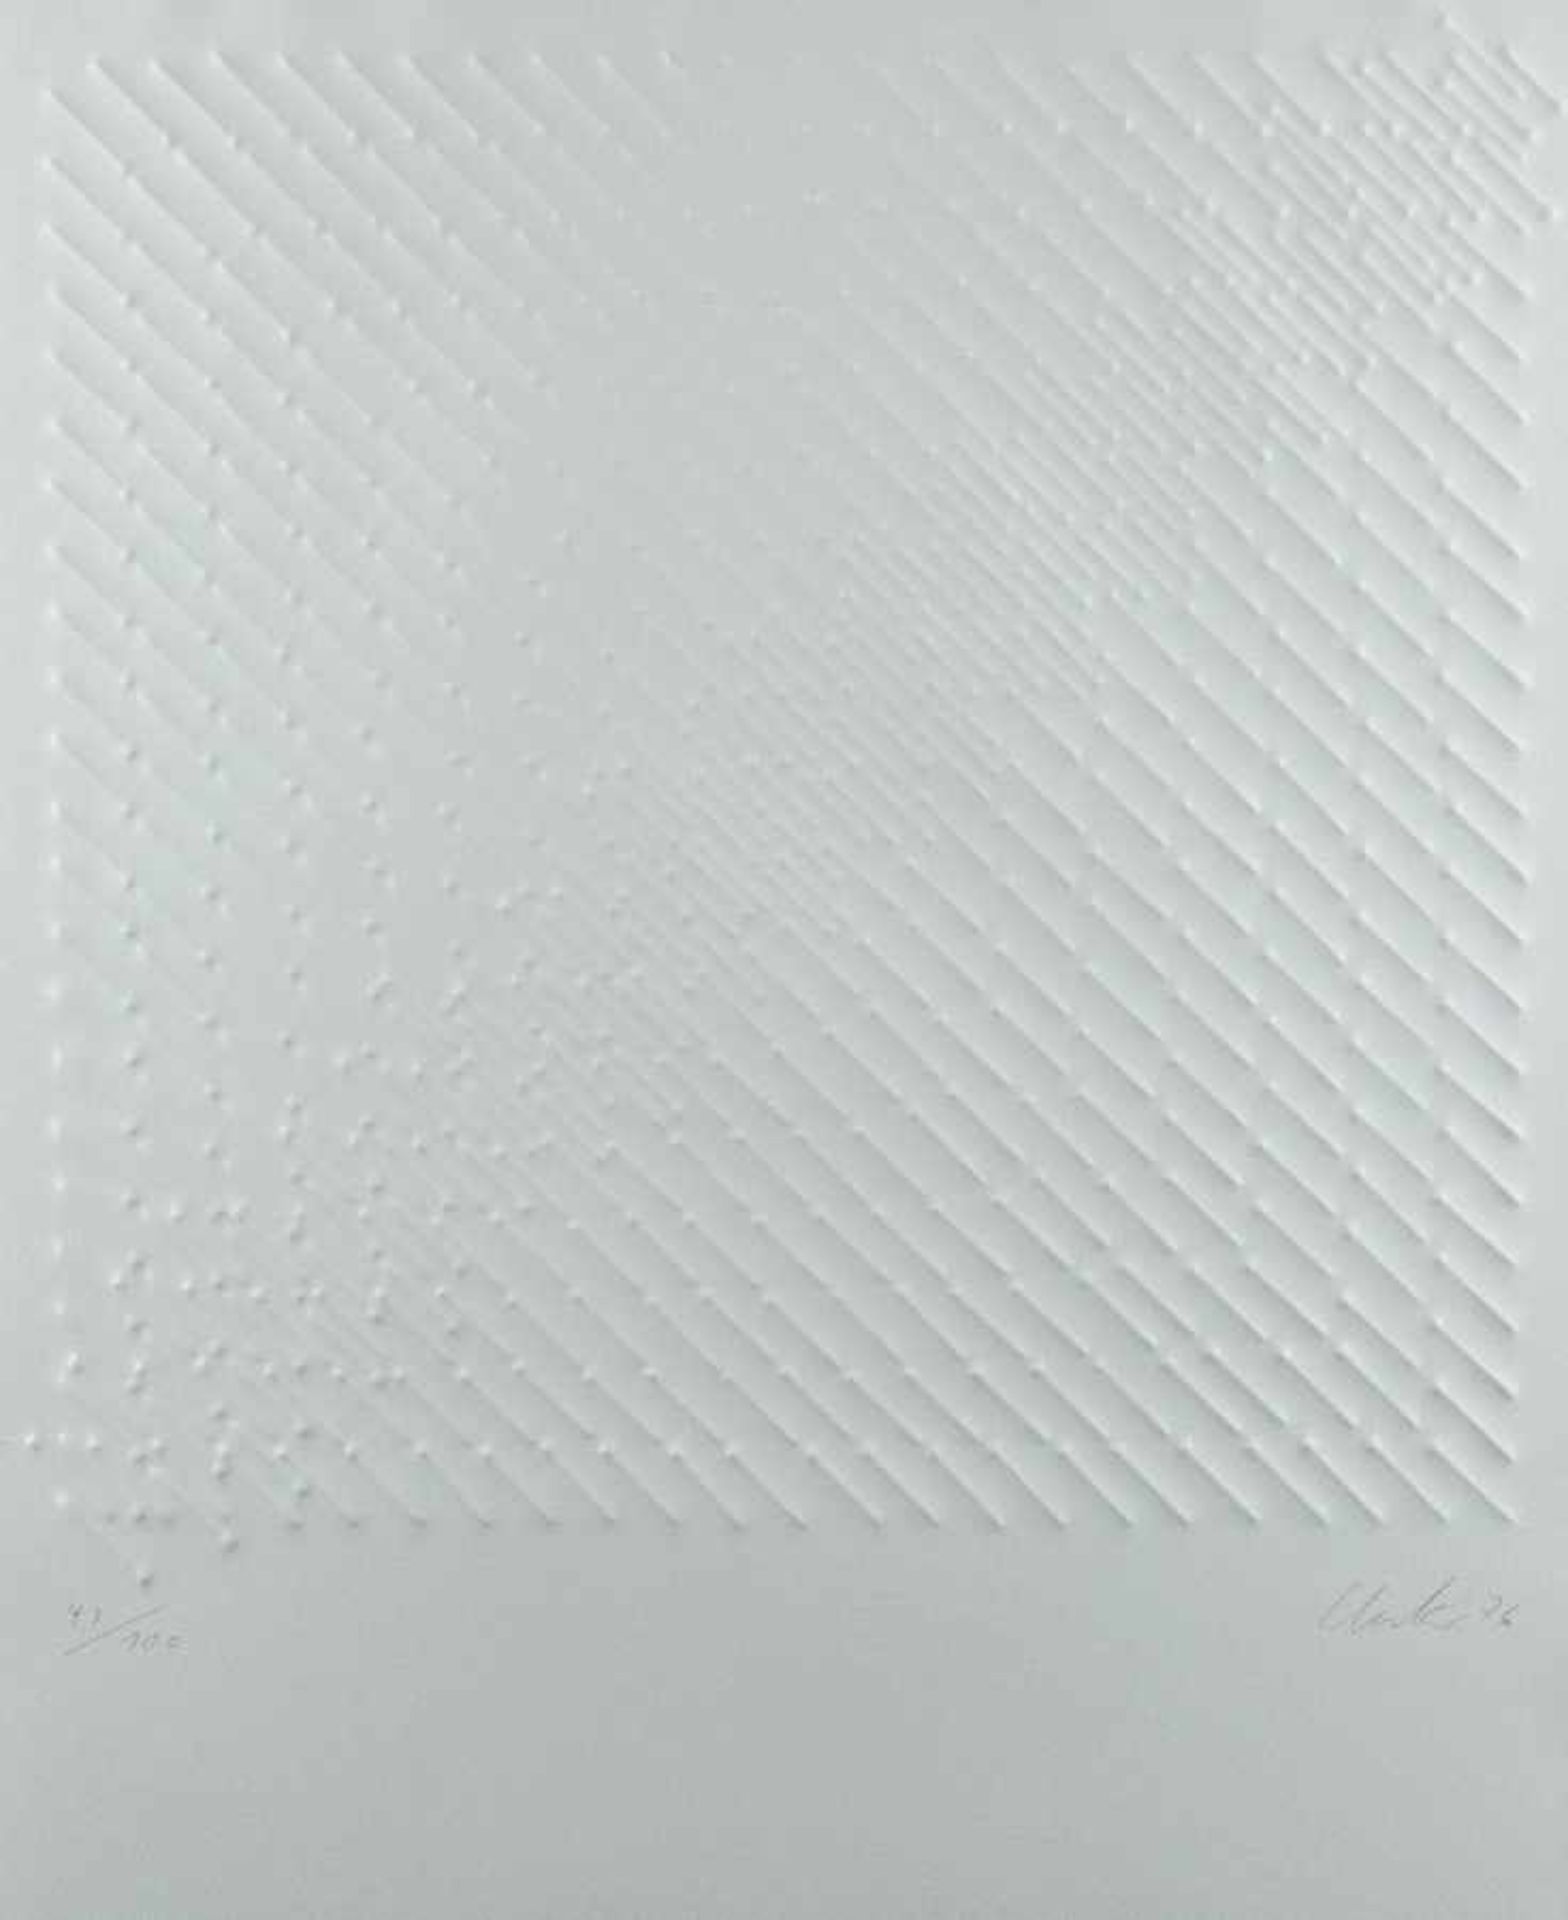 Günther Uecker1930 WentdorfDiagonal structureEmbossing on paper; H 650 mm, W 495 mm; numbered